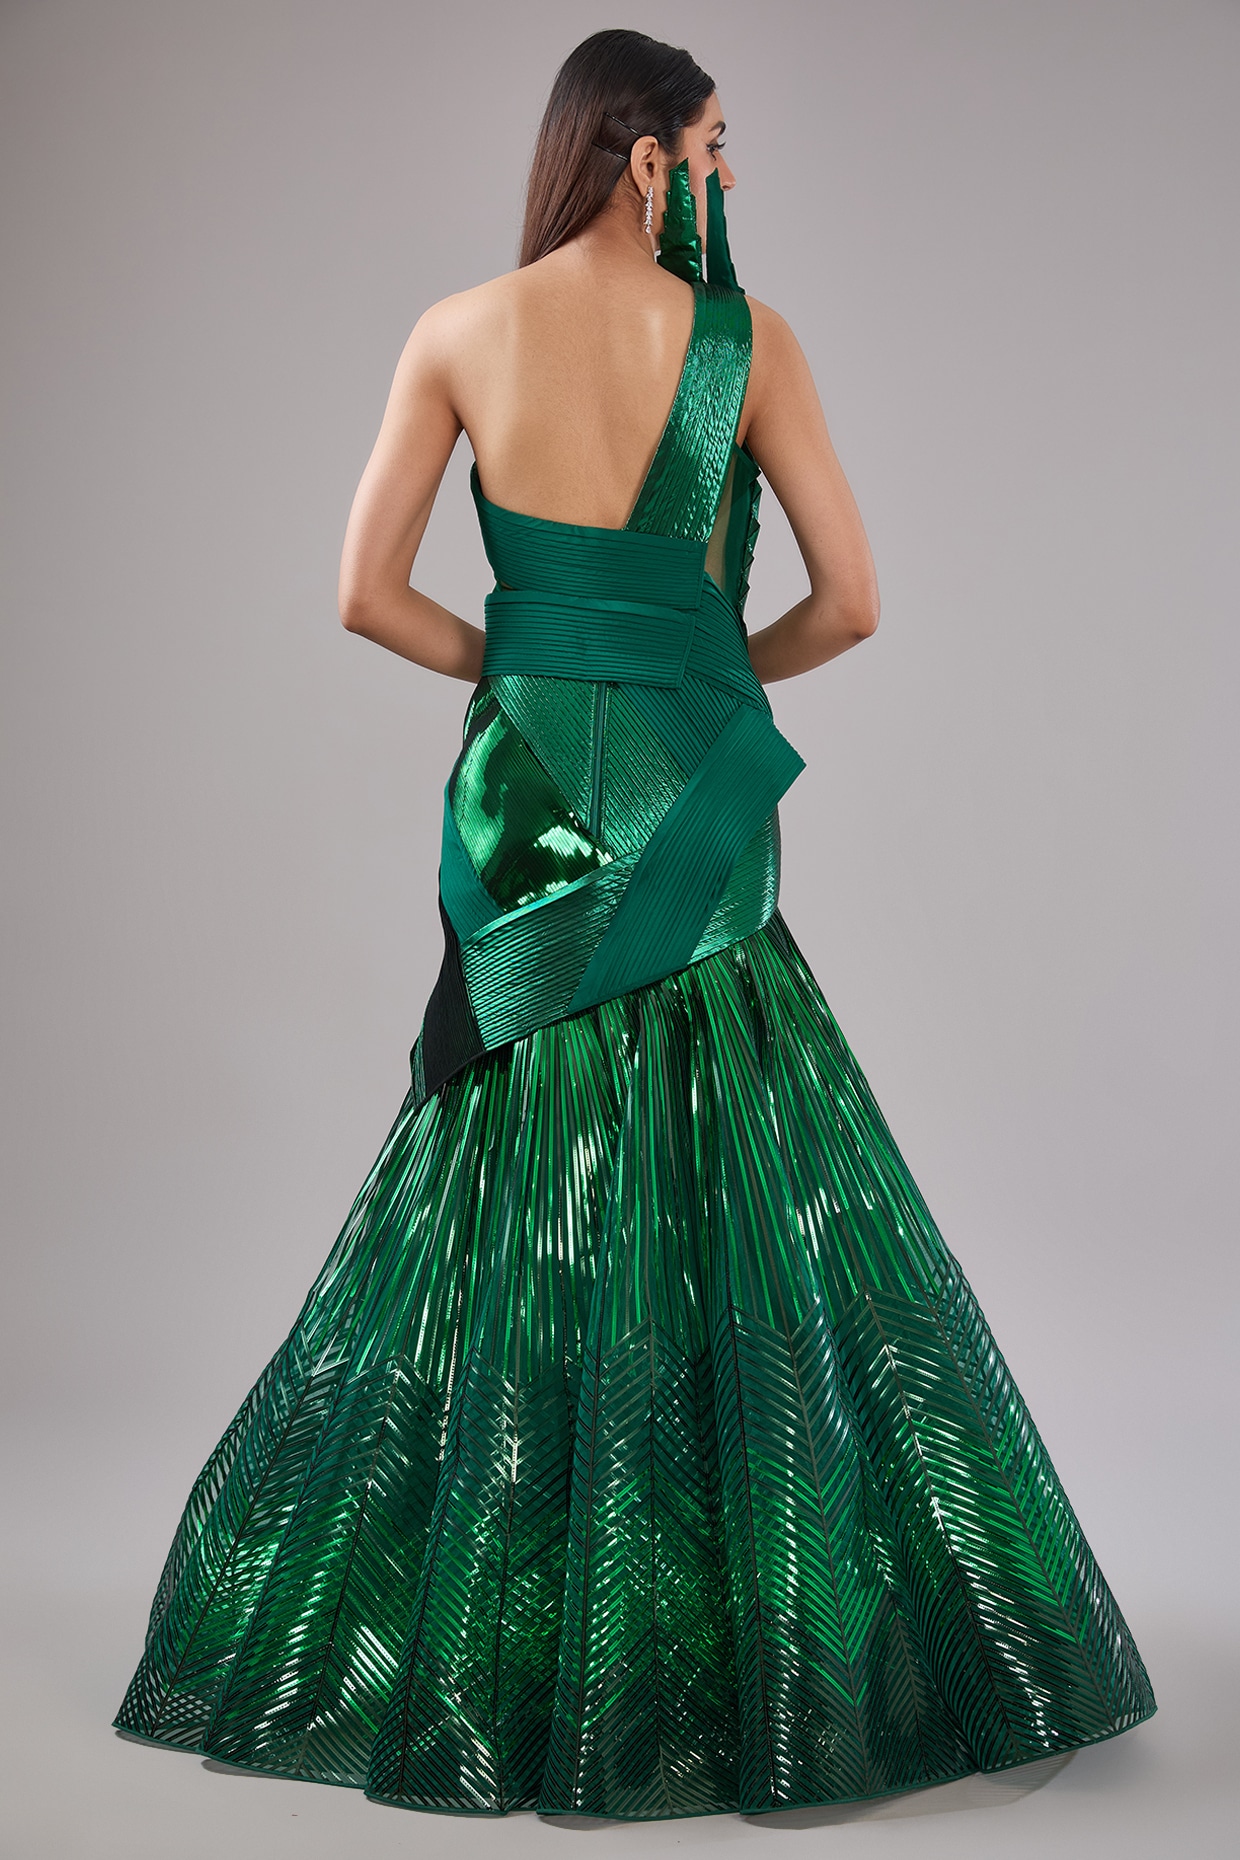 Green Cocktail Dresses - Cocktail Collection | ROSA CLARÁ